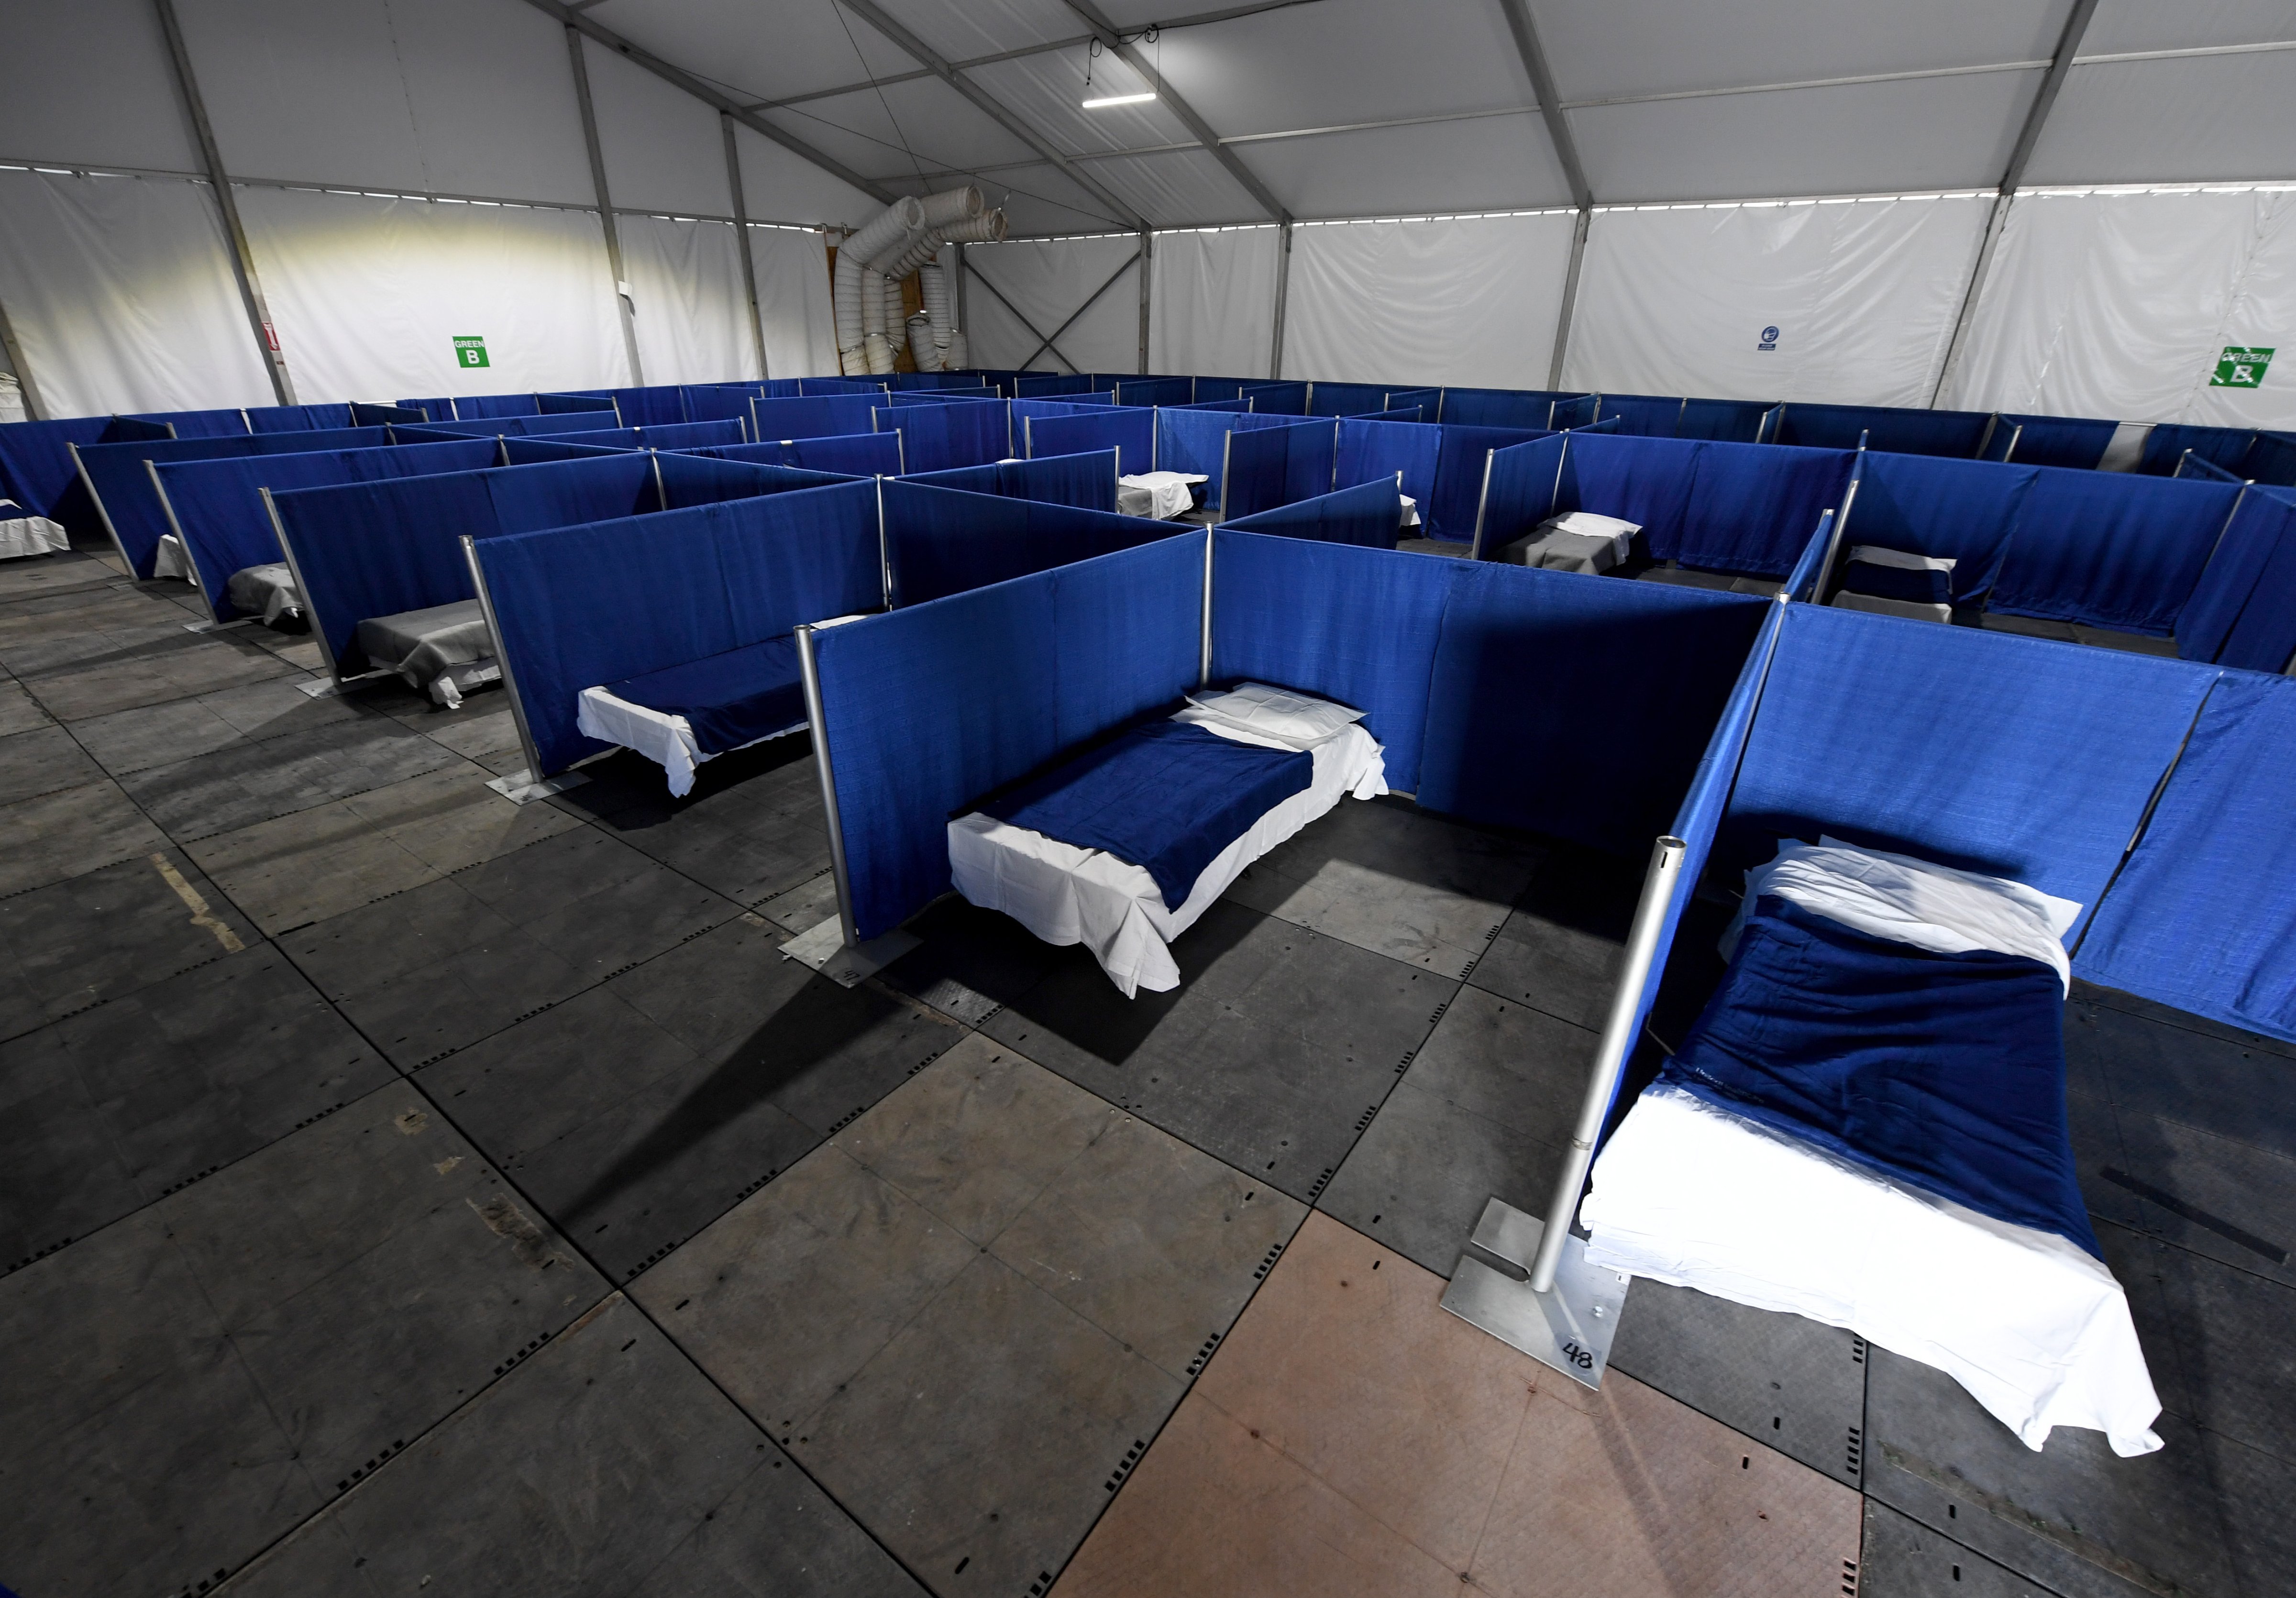 Cots are set up in a tent for homeless people who have nowhere to self-isolate in Las Vegas, Nevada, on April 13, 2020. The center will have separate areas for those requiring quarantine due to COVID-19, those with symptoms who have tested positive, and those who have tested positive but have no symptoms. (Ethan Miller—Getty Images)